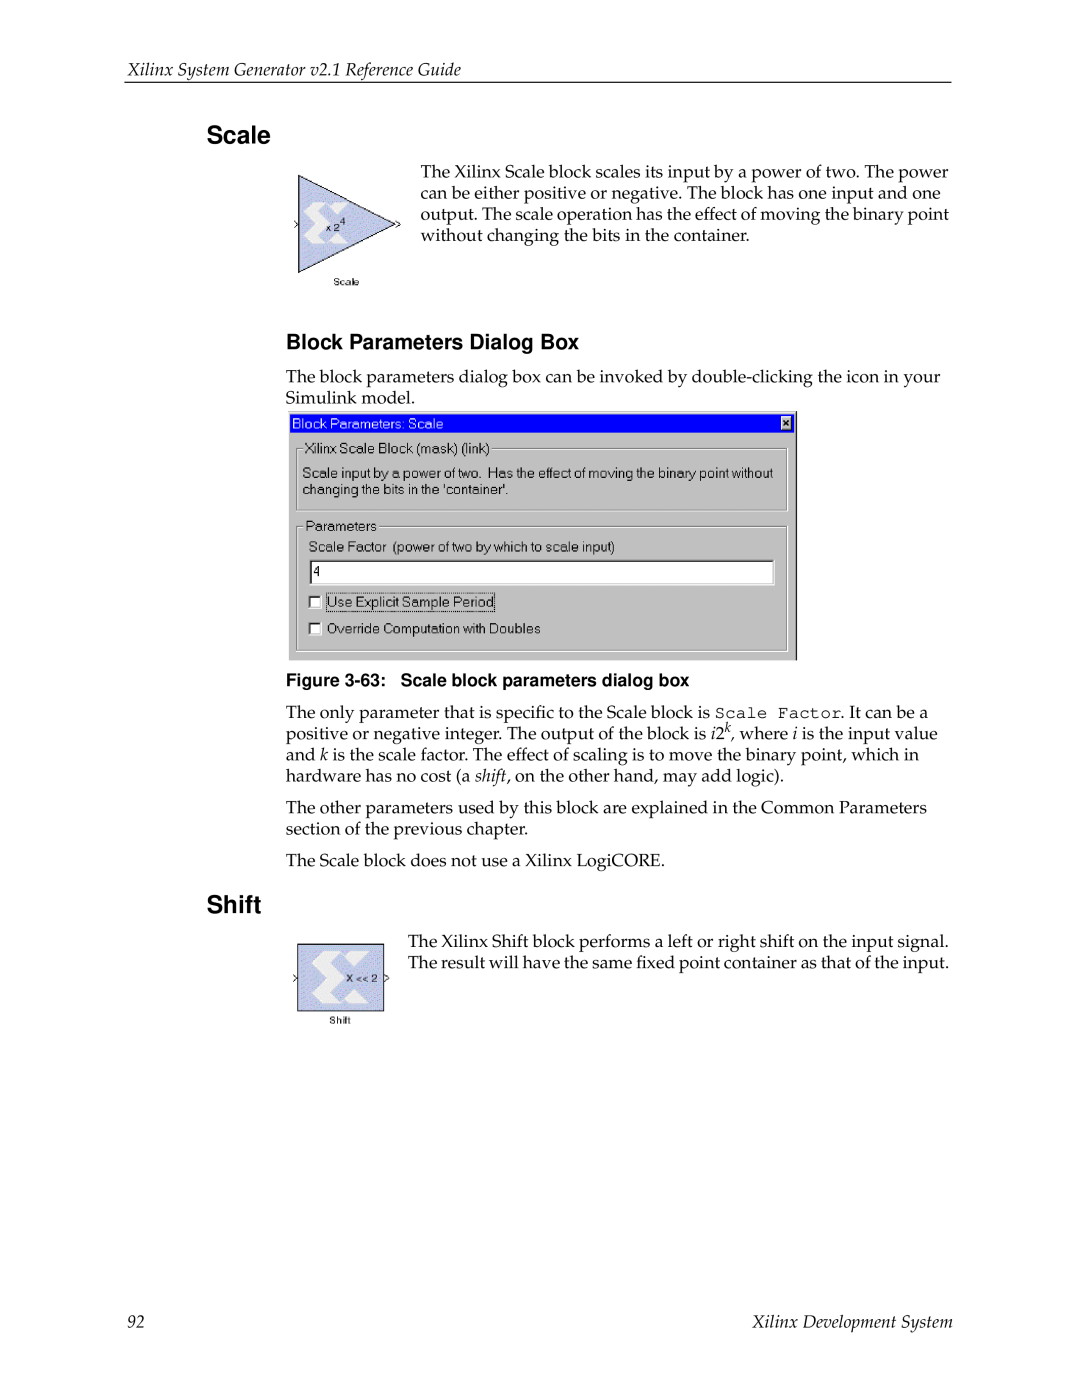 Xilinx V2.1 manual Scale, Shift, Block Parameters Dialog Box, Xilinx System Generator v2.1 Reference Guide 